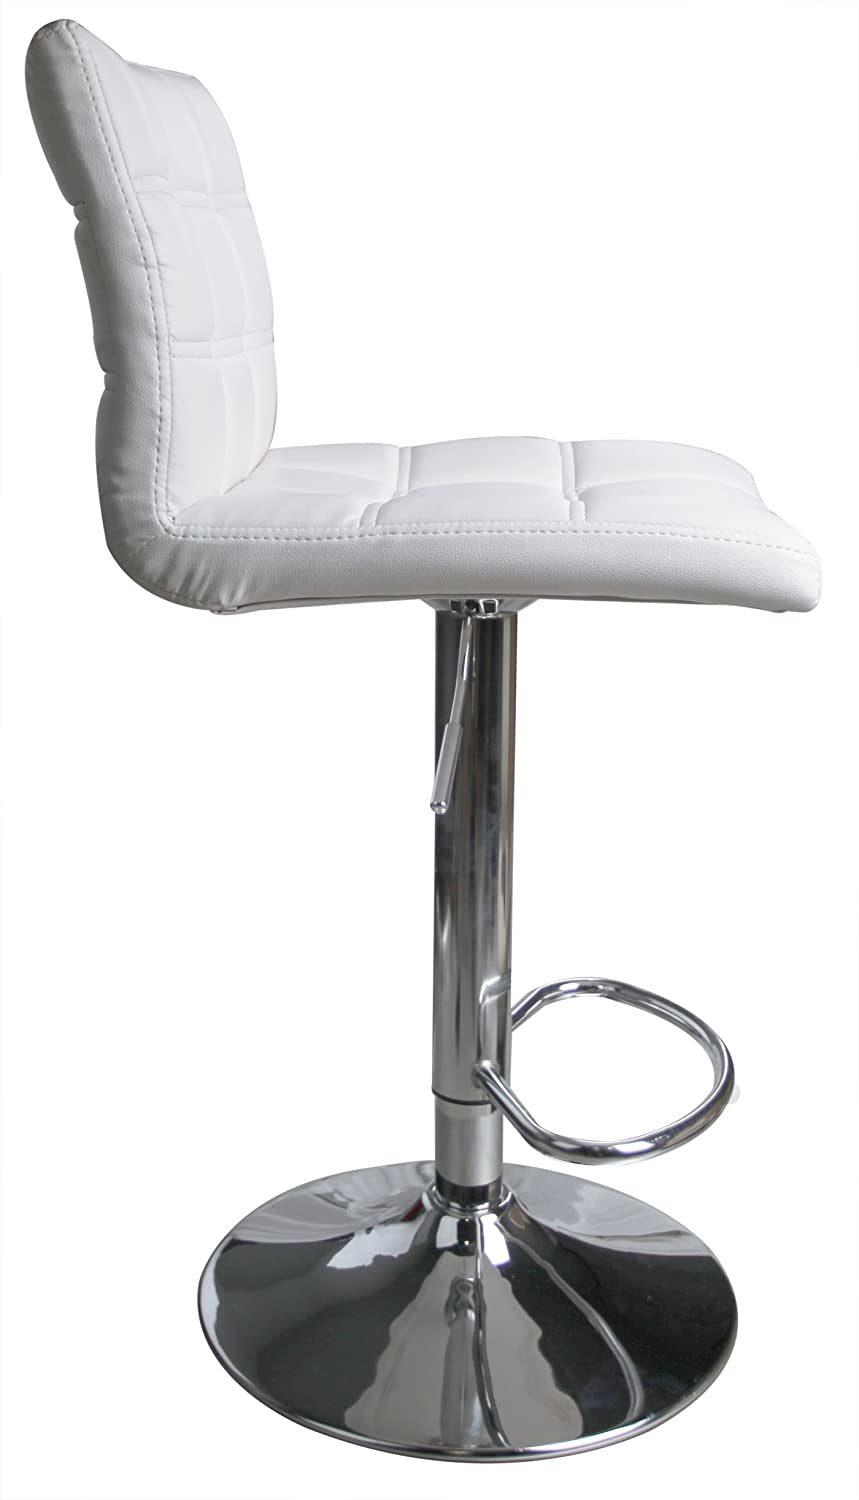 Better High Quality Bar Chair, Salon Bar Chair, Used Barber Chairs for Sale